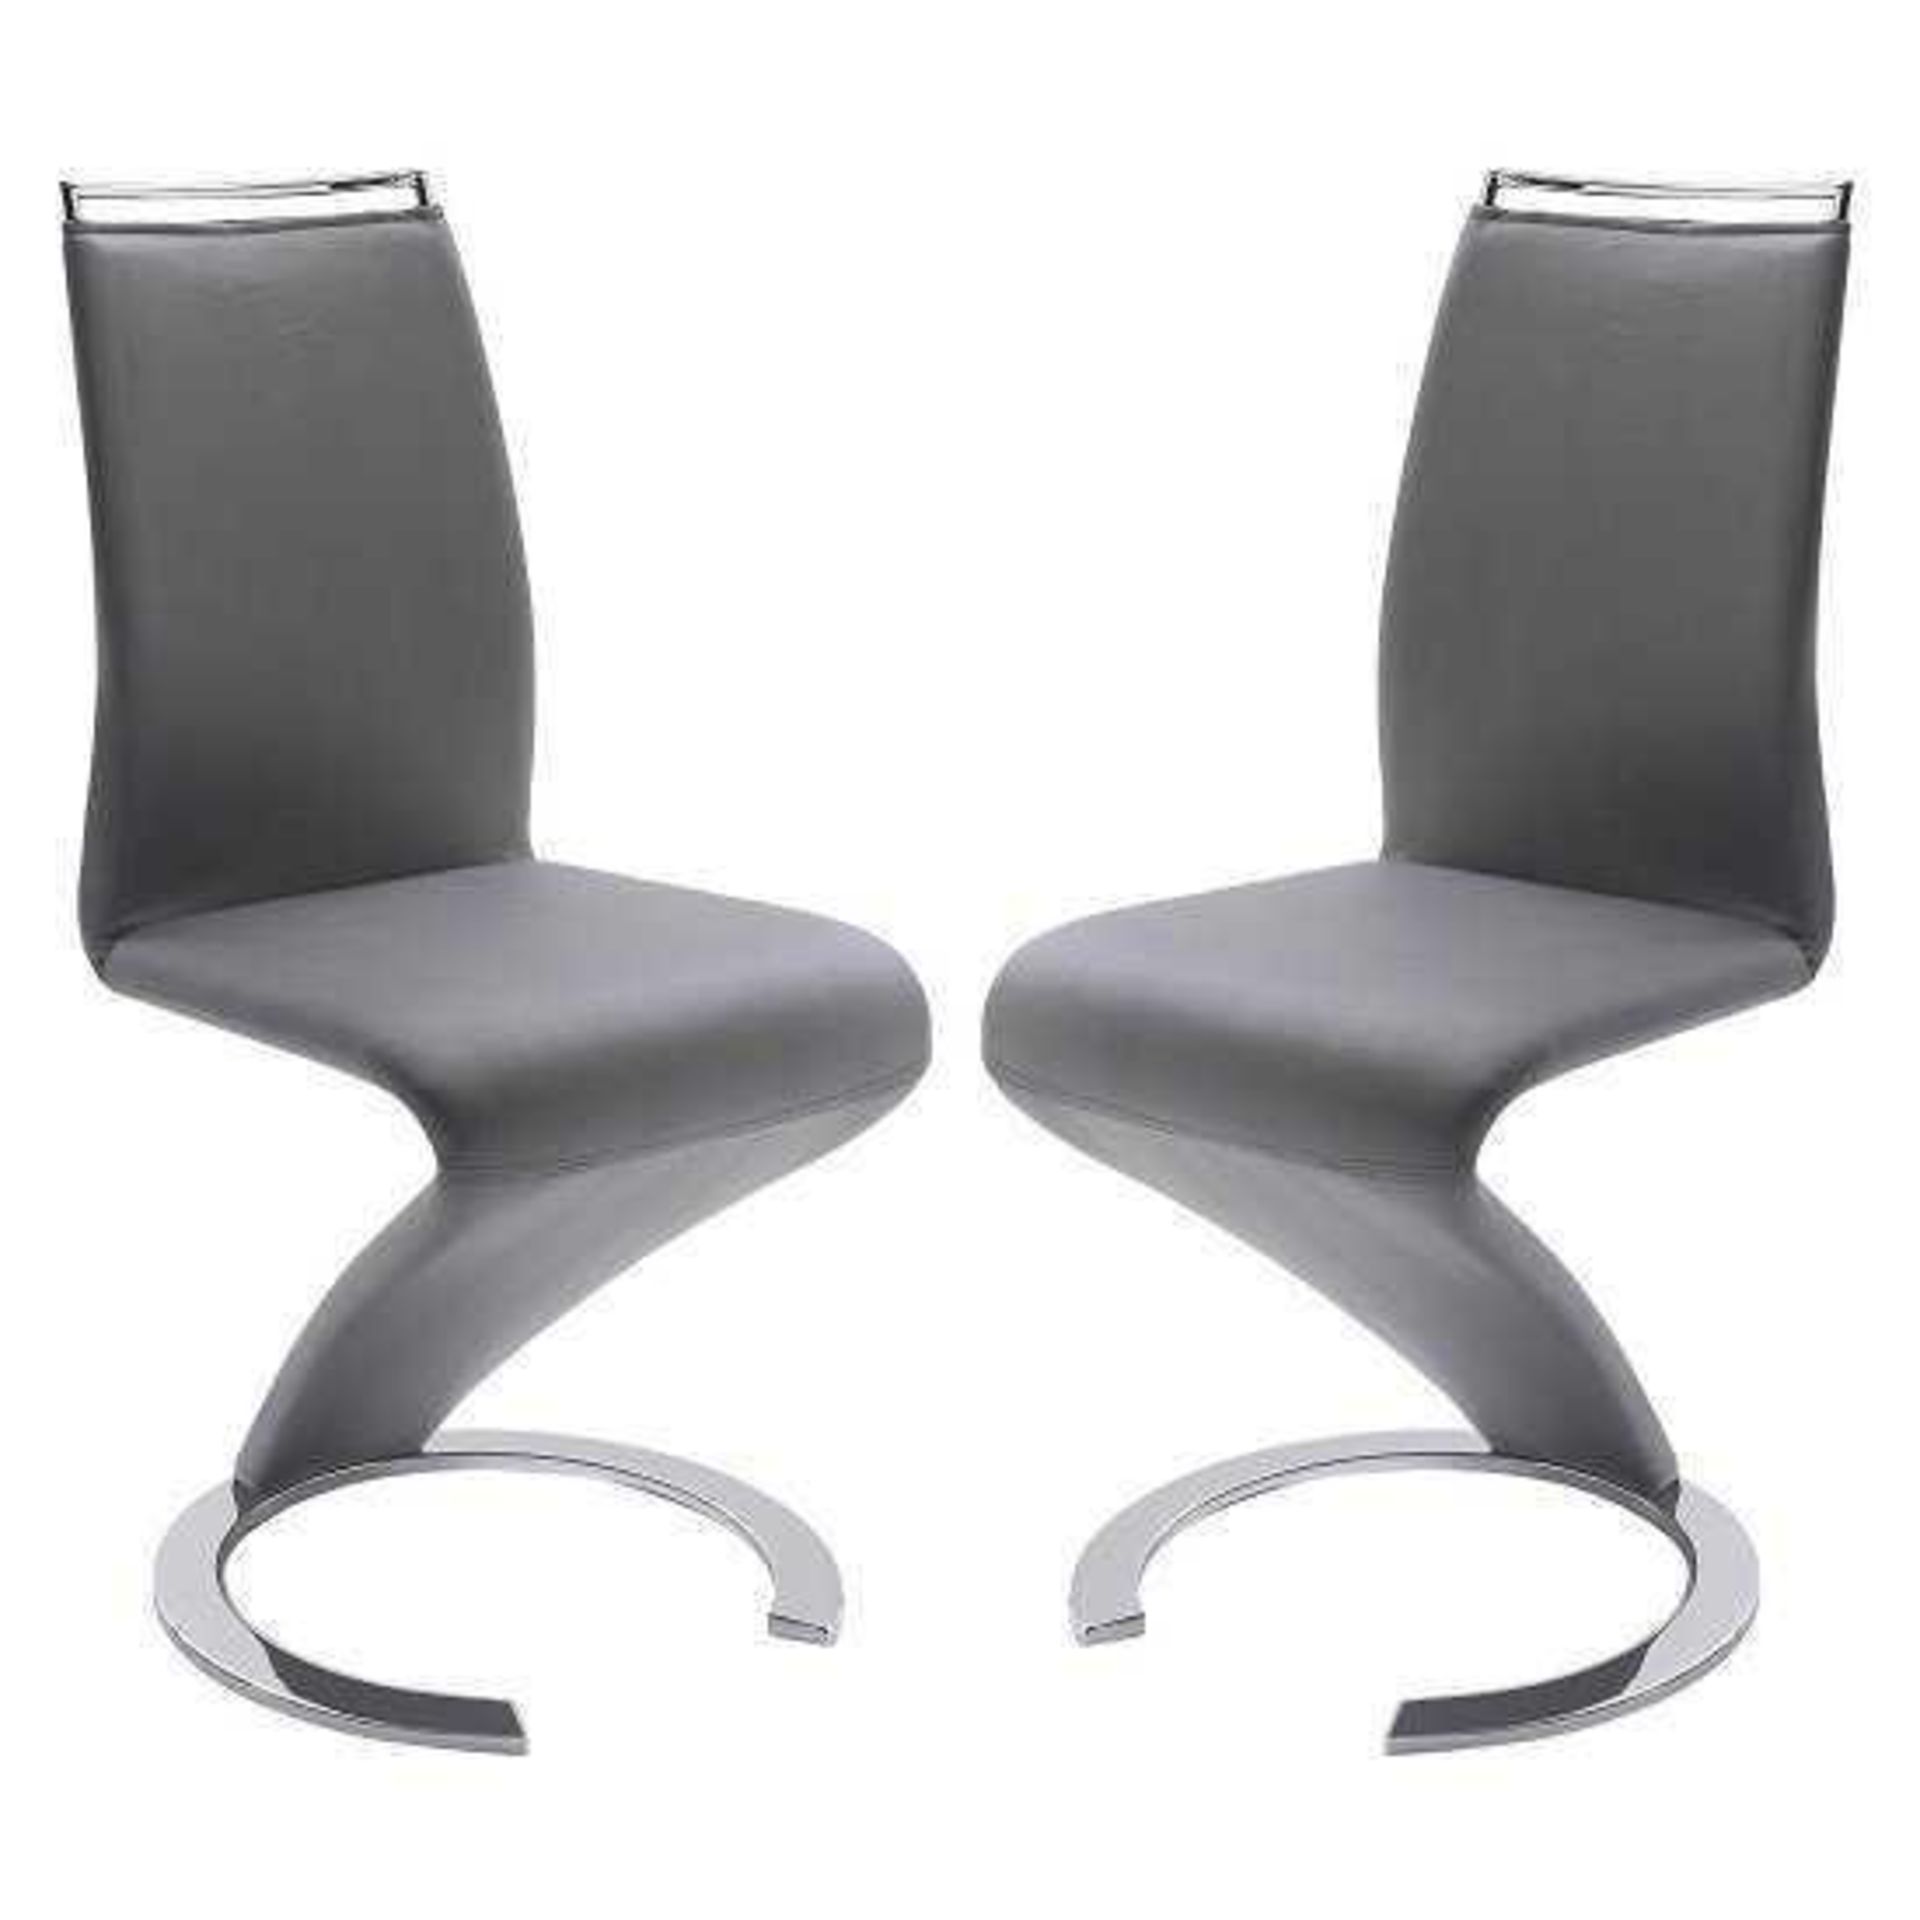 RRP £150. Boxed Grey Z Shape Dining Chair.